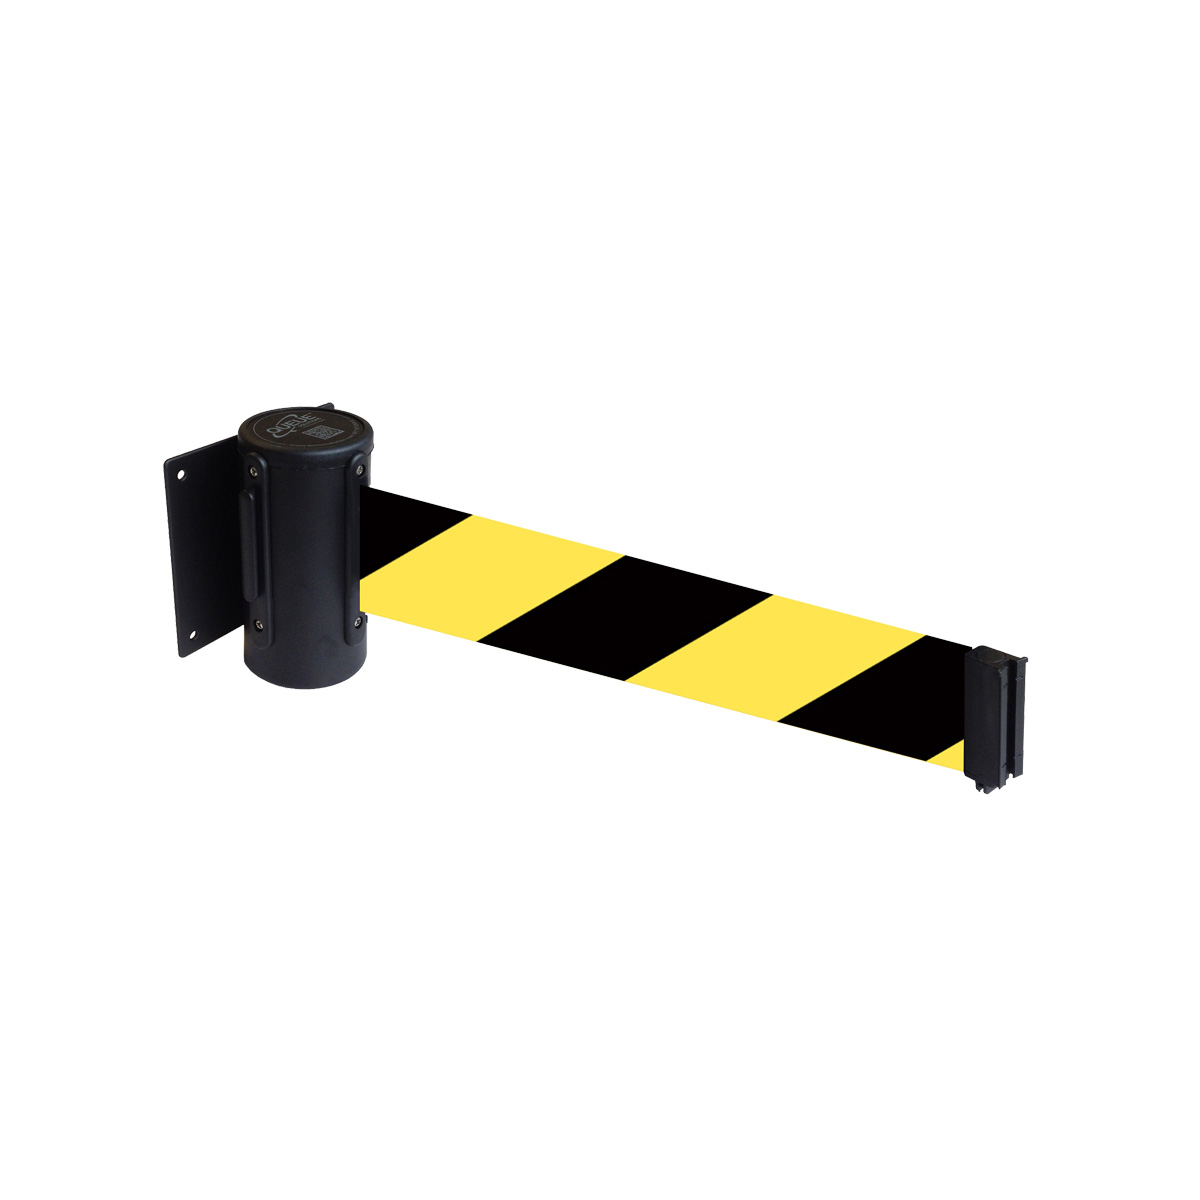 WallMaster Wall Mounted Retractable Barriers Has 19 Tape Colours to Choose From